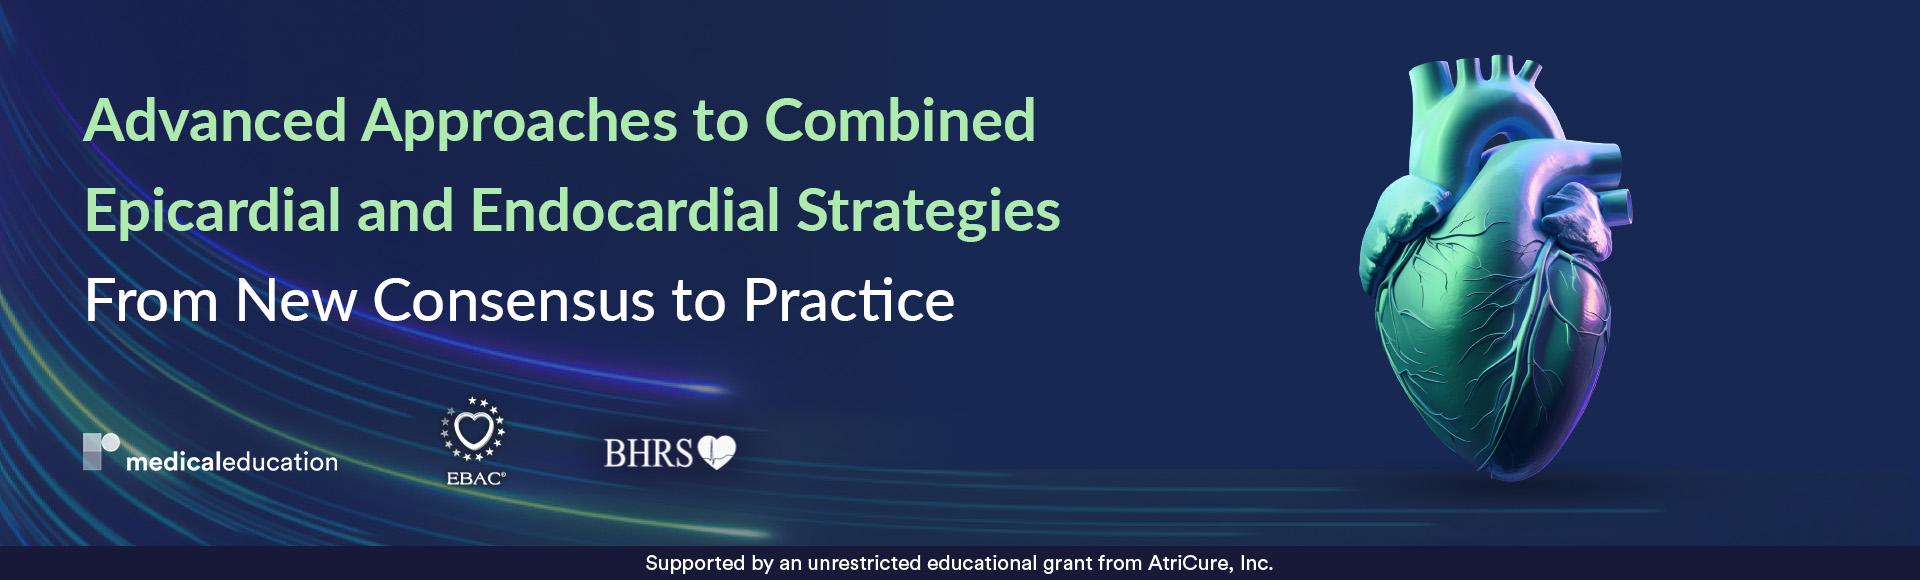 Advanced Approaches to Combined Epicardial and Endocardial Strategies – From New Consensus to Practice